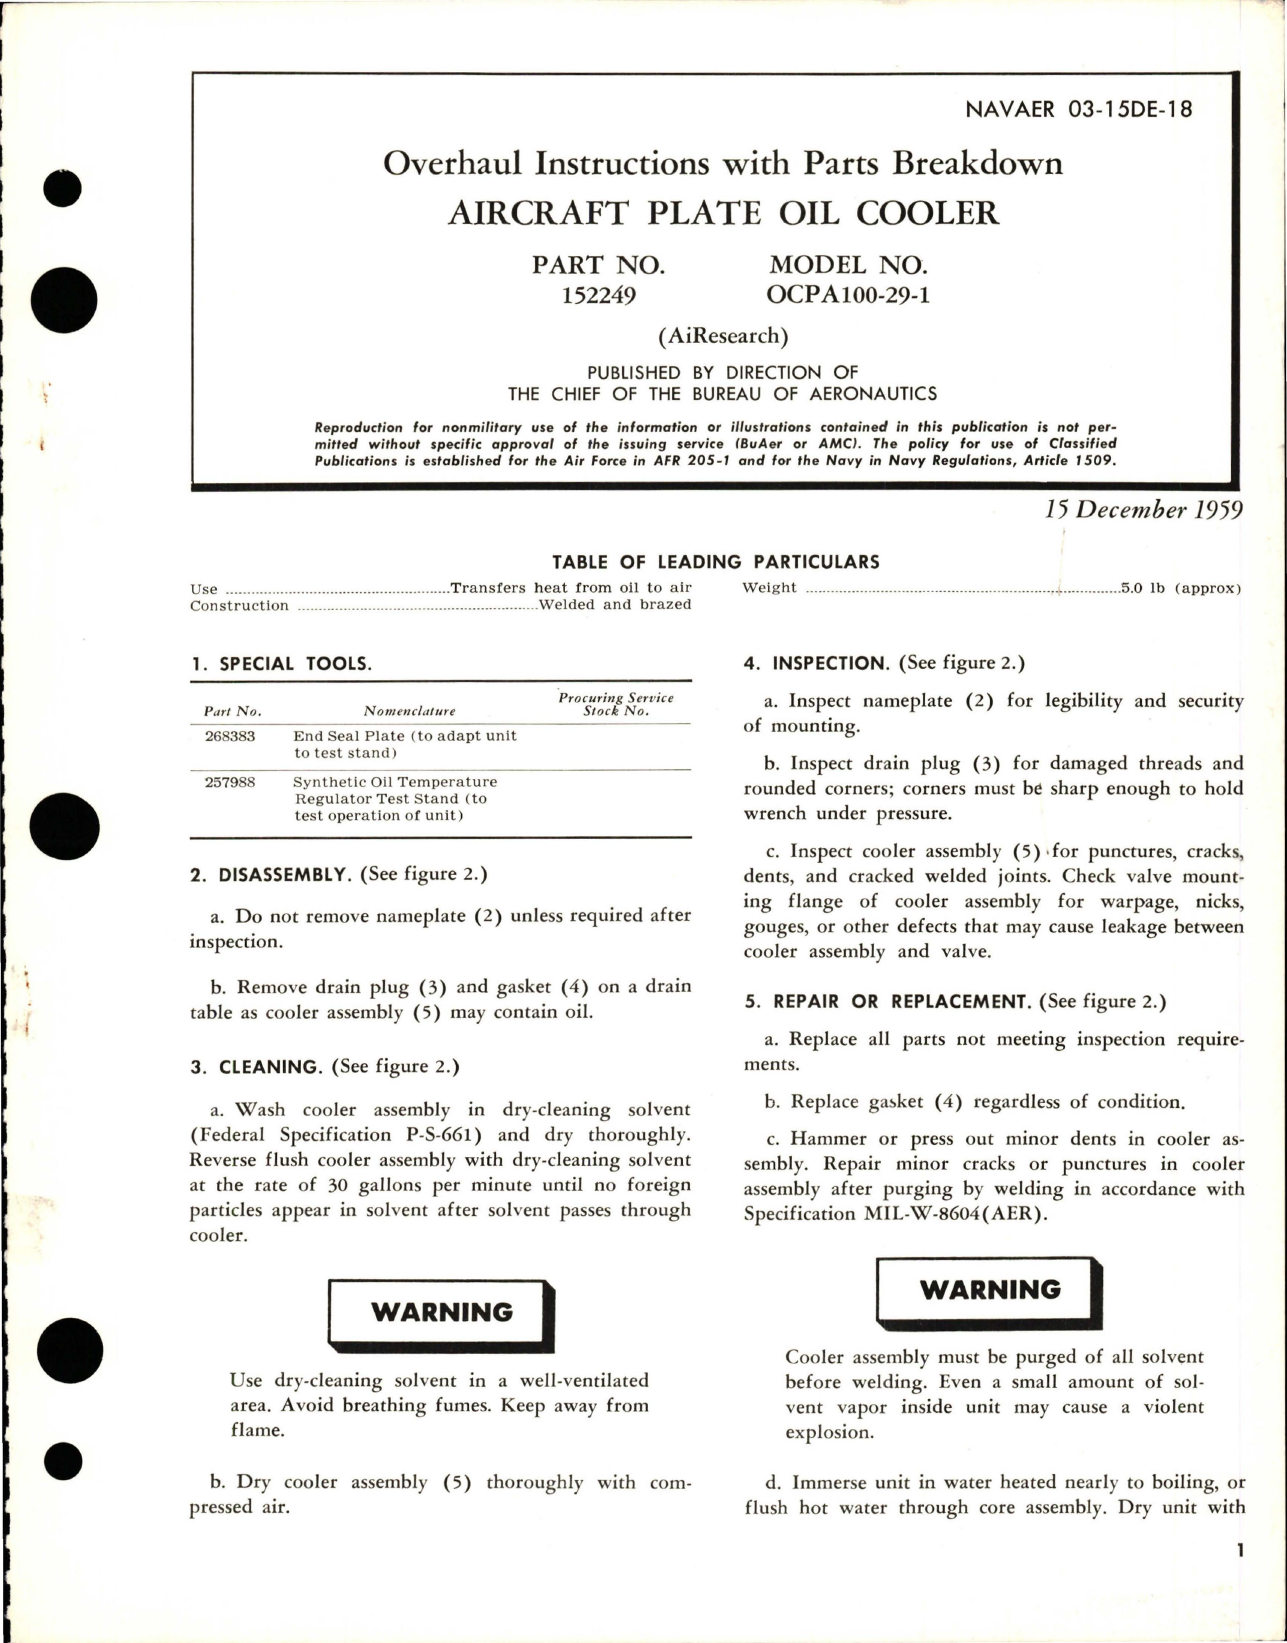 Sample page 1 from AirCorps Library document: Overhaul Instructions with Parts Breakdown for Aircraft Plate Oil Cooler - Part 152249 - Model OCPA100-29-1